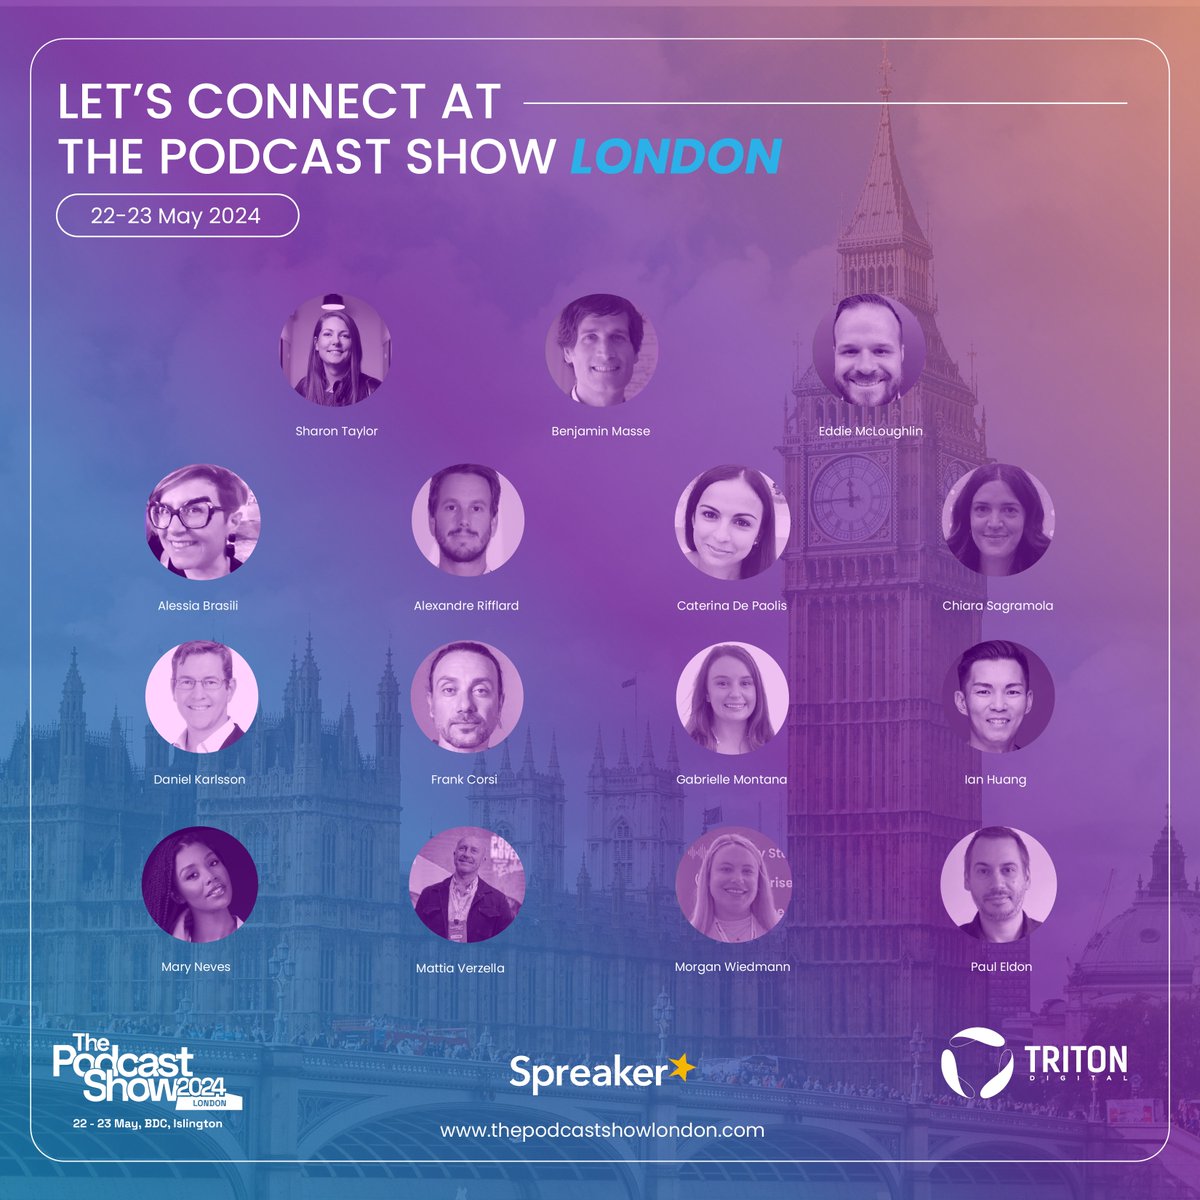 ⏳ 1 MORE WEEK till this audio rock star team from Triton / @spreaker take on @PodcastShowLDN!!! And this year we are going BIG from: 🎙 9 speaking opportunities 22 May sessions - 10:15am 'How Does Video Fit Within The Podcast Ecosystem' 11am 'Analytics 🤝 Audio: The Podcast